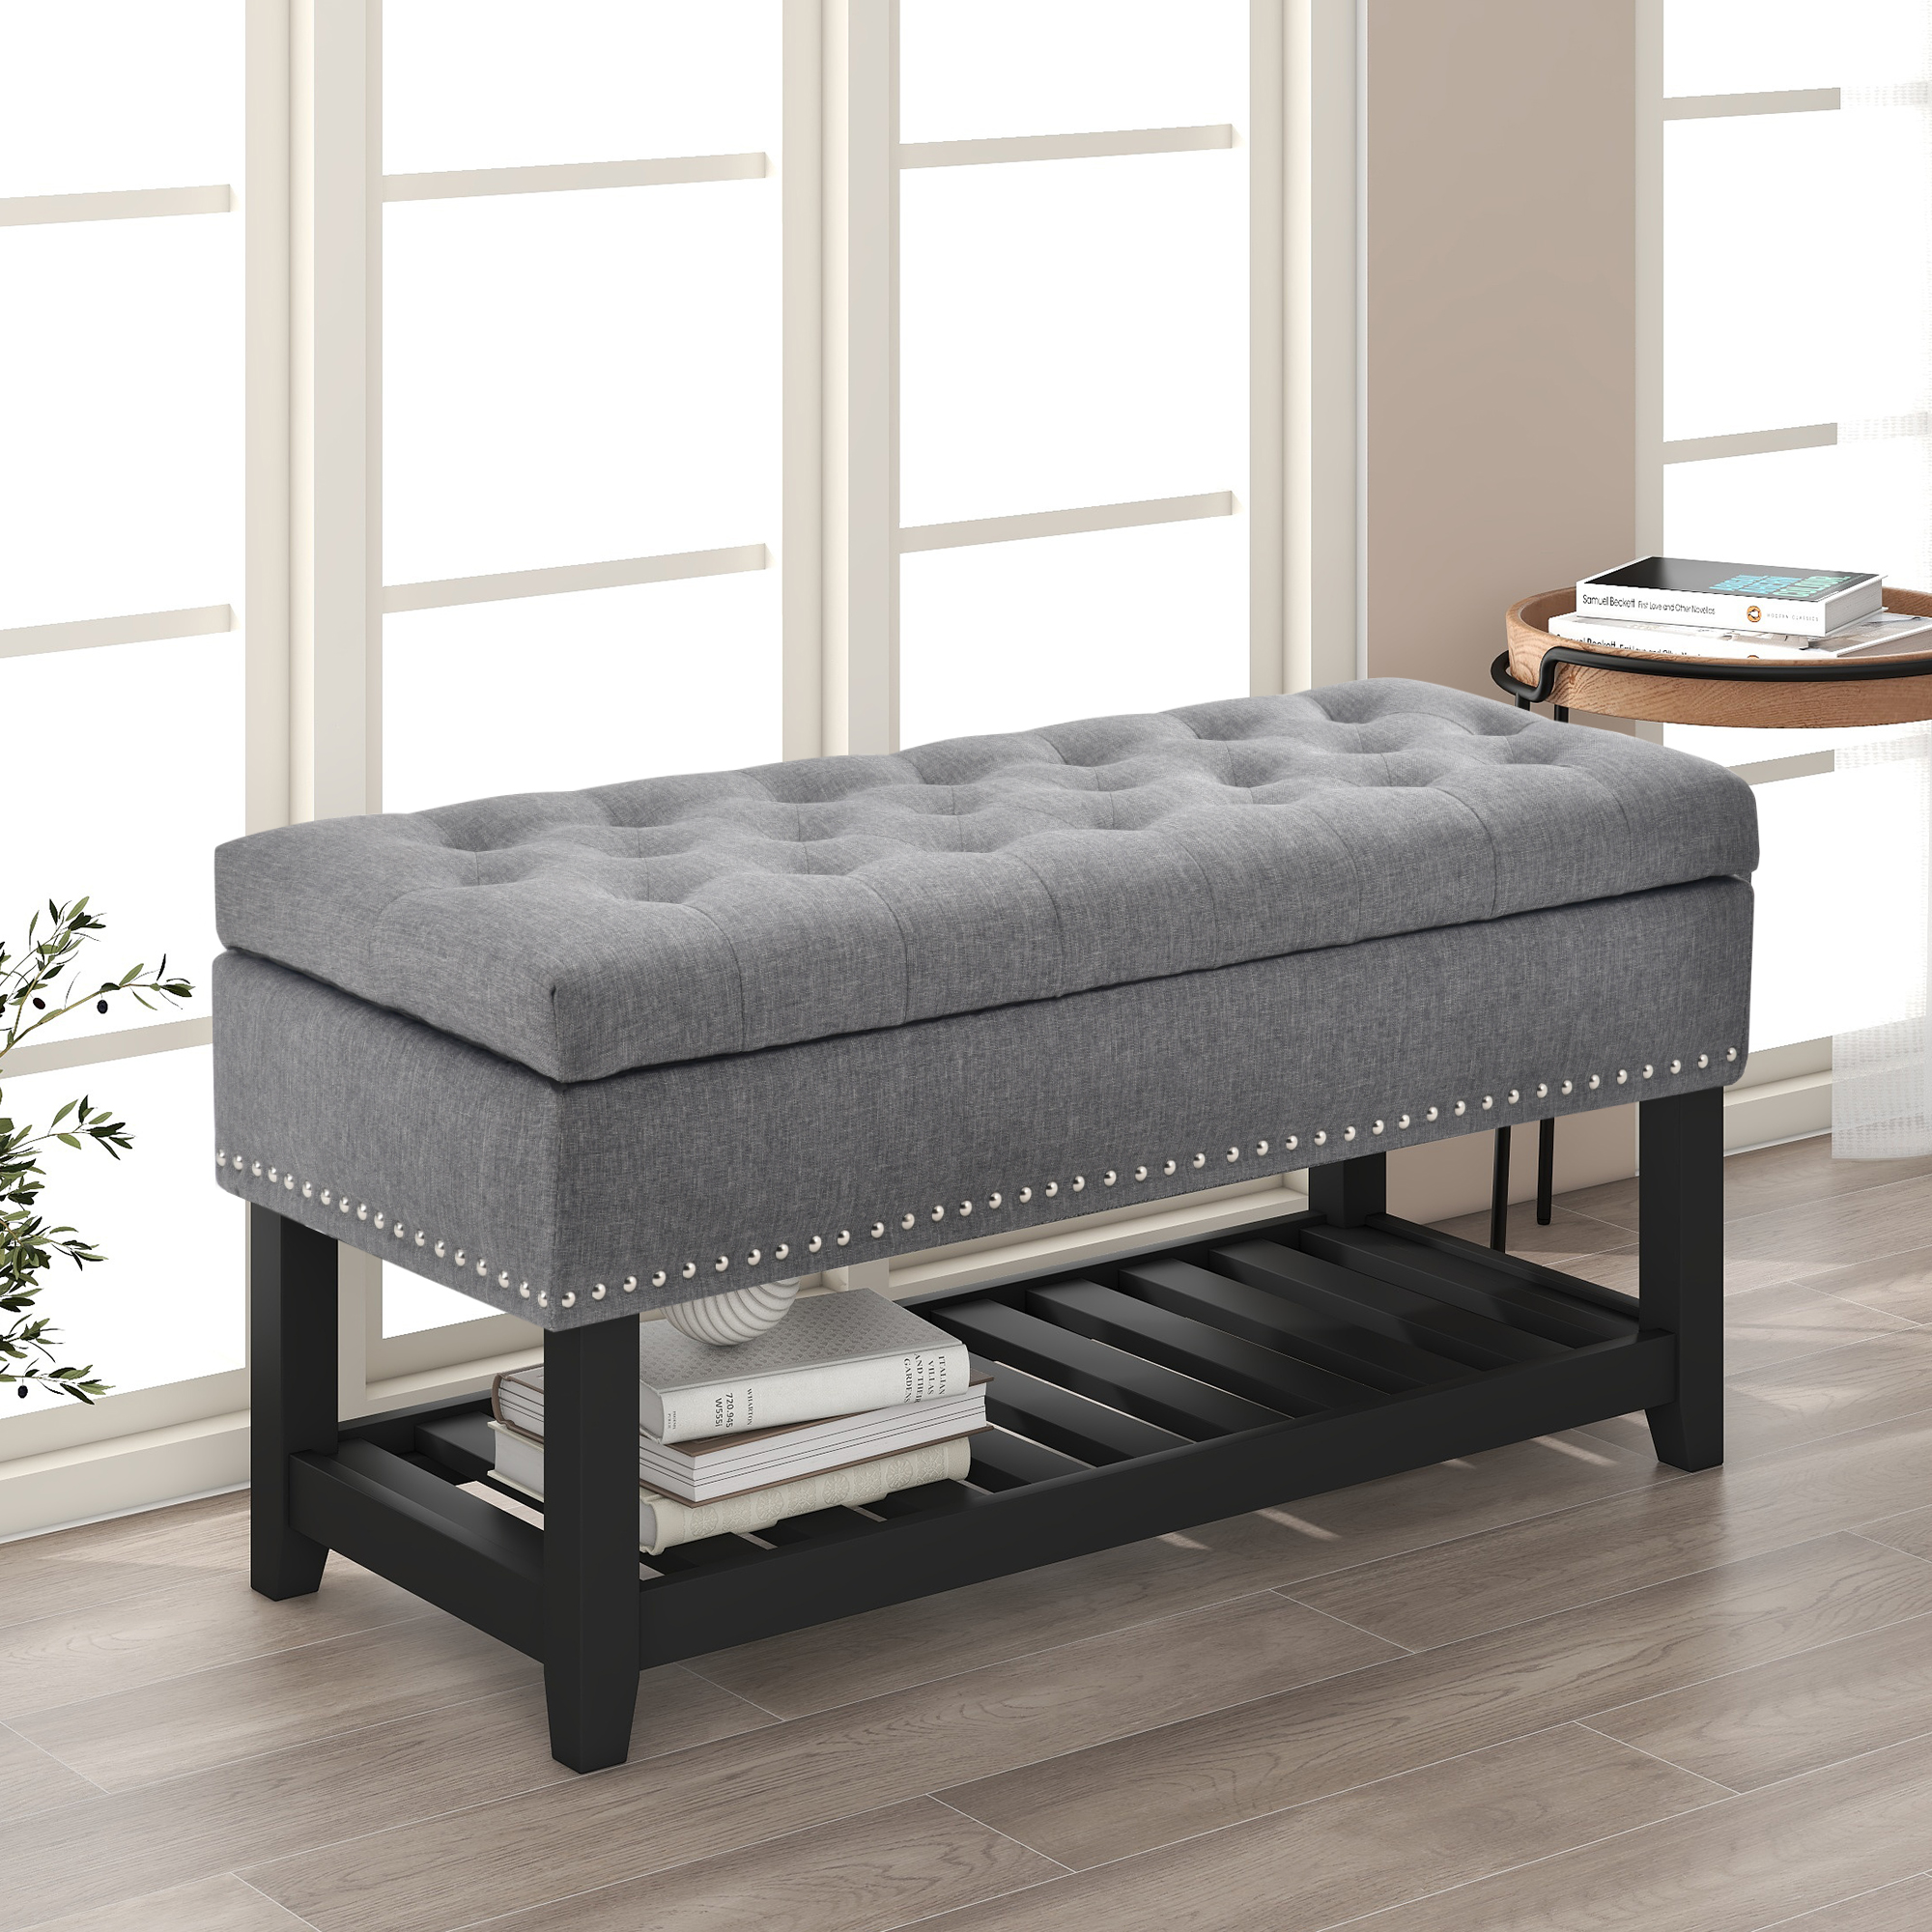 Bench Entryway Storage,Homes Collection Wood Storage Bench with 3 Drawers and 3 Baskets Shoe Bench Fully Assemble Storage Bench Black